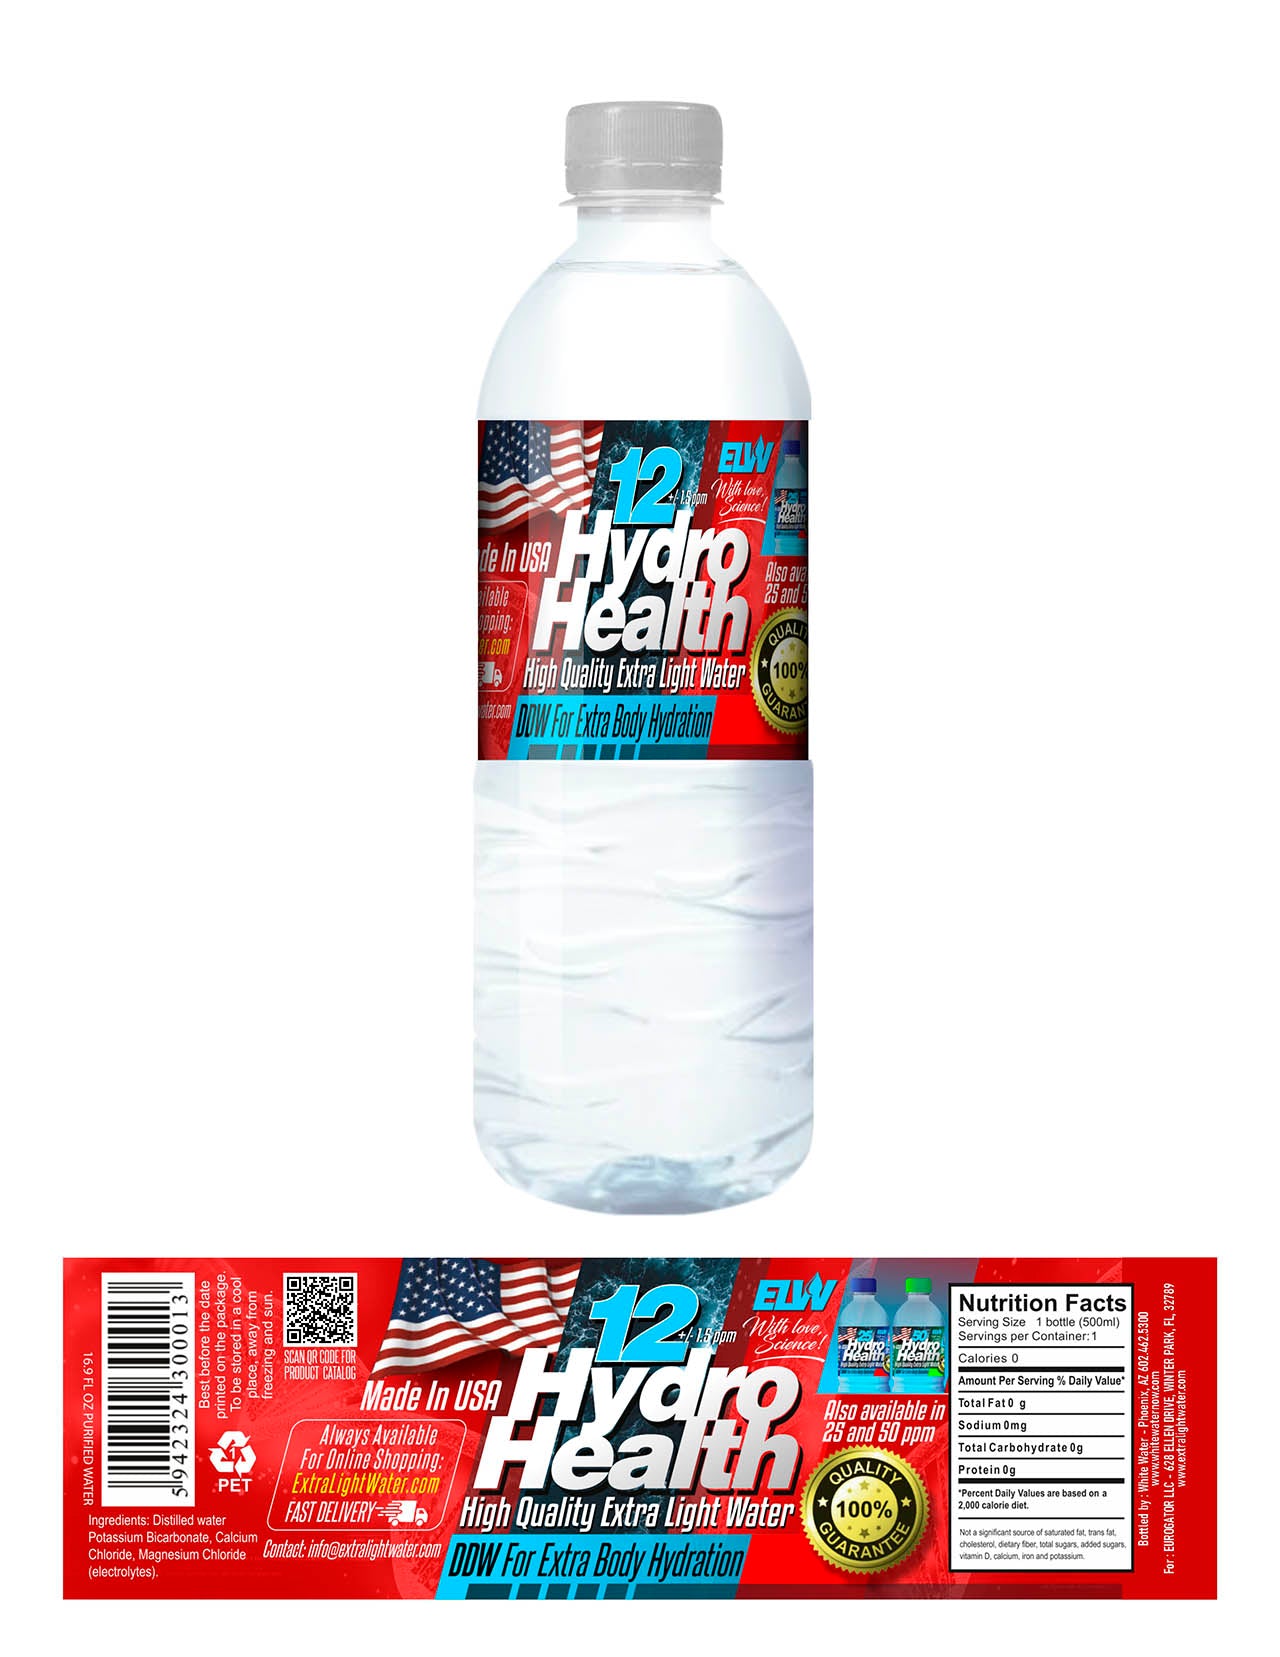 12 ppm Hydro-Health-Promo Price: ONLY $255 for one case of 24 bottles (EACH costs $10.62 delivered) - x 500 ML =12 LITERS - including S&H; t is cheaper compared to 10 ppm DDW , $14-$16 per 500 ML that other vendors sell from Russia